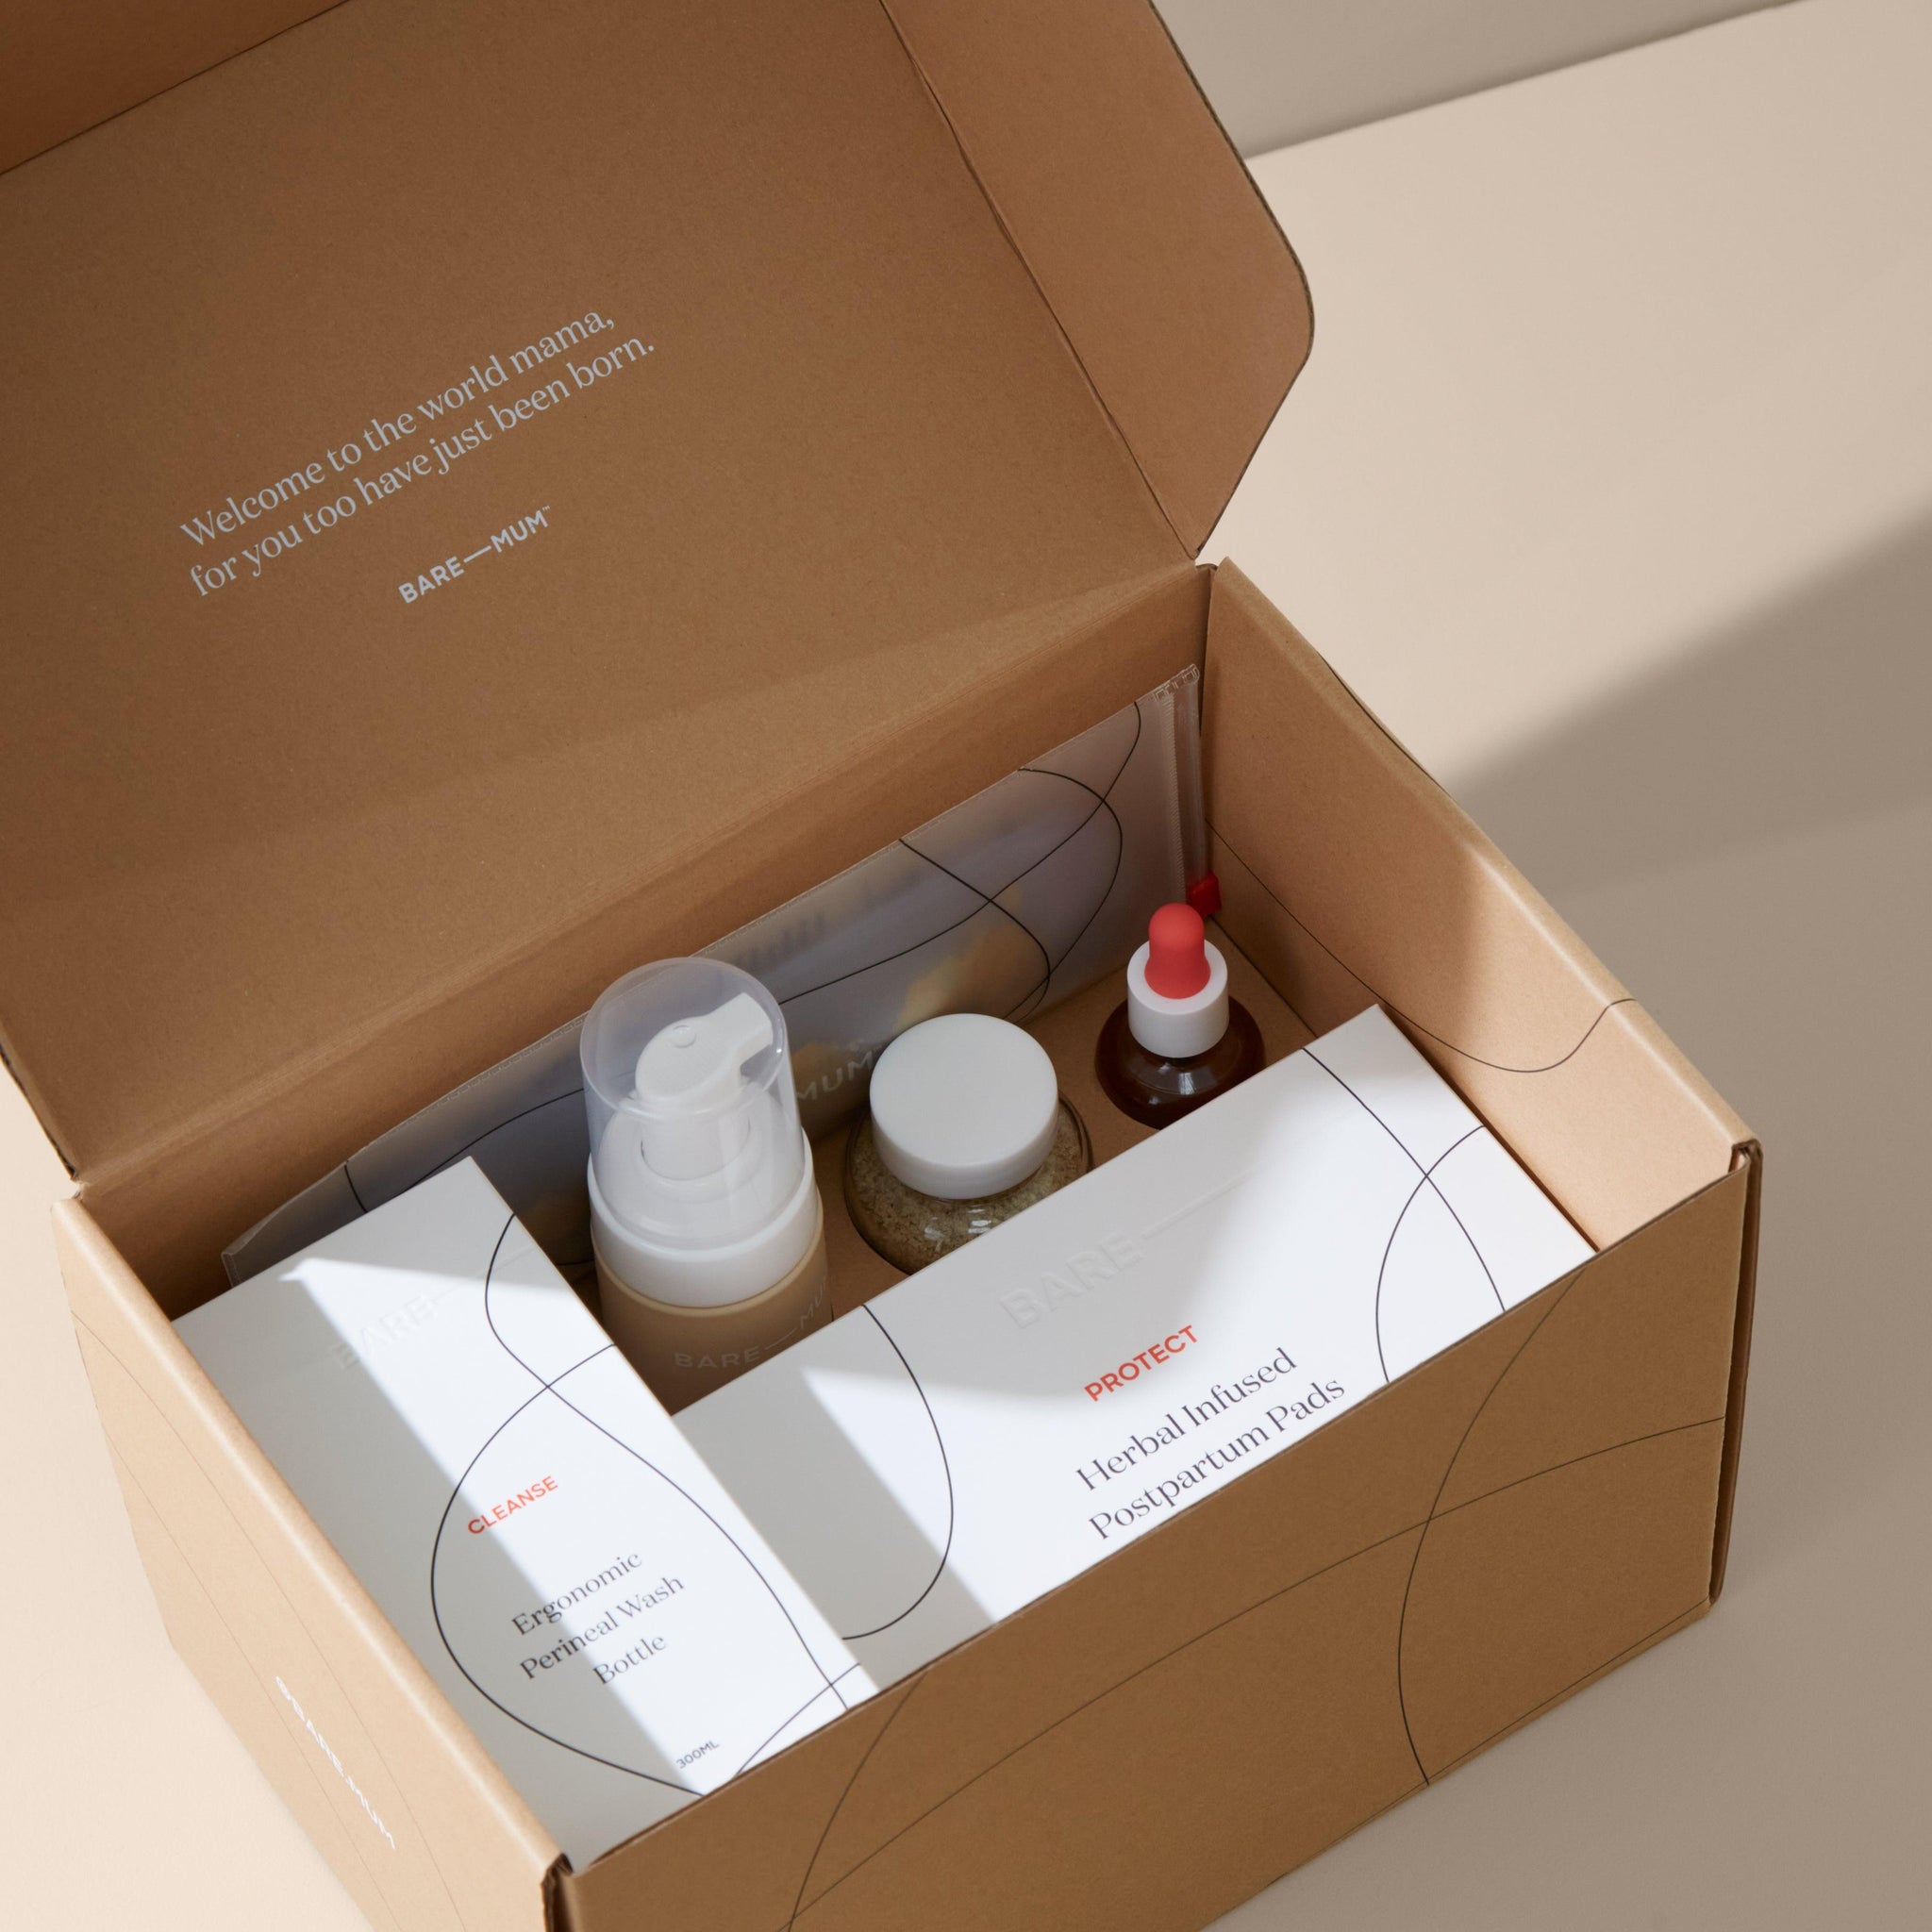 A Bare Mum Complete Recovery Care Kit packaged in a cardboard box for postpartum mothers.